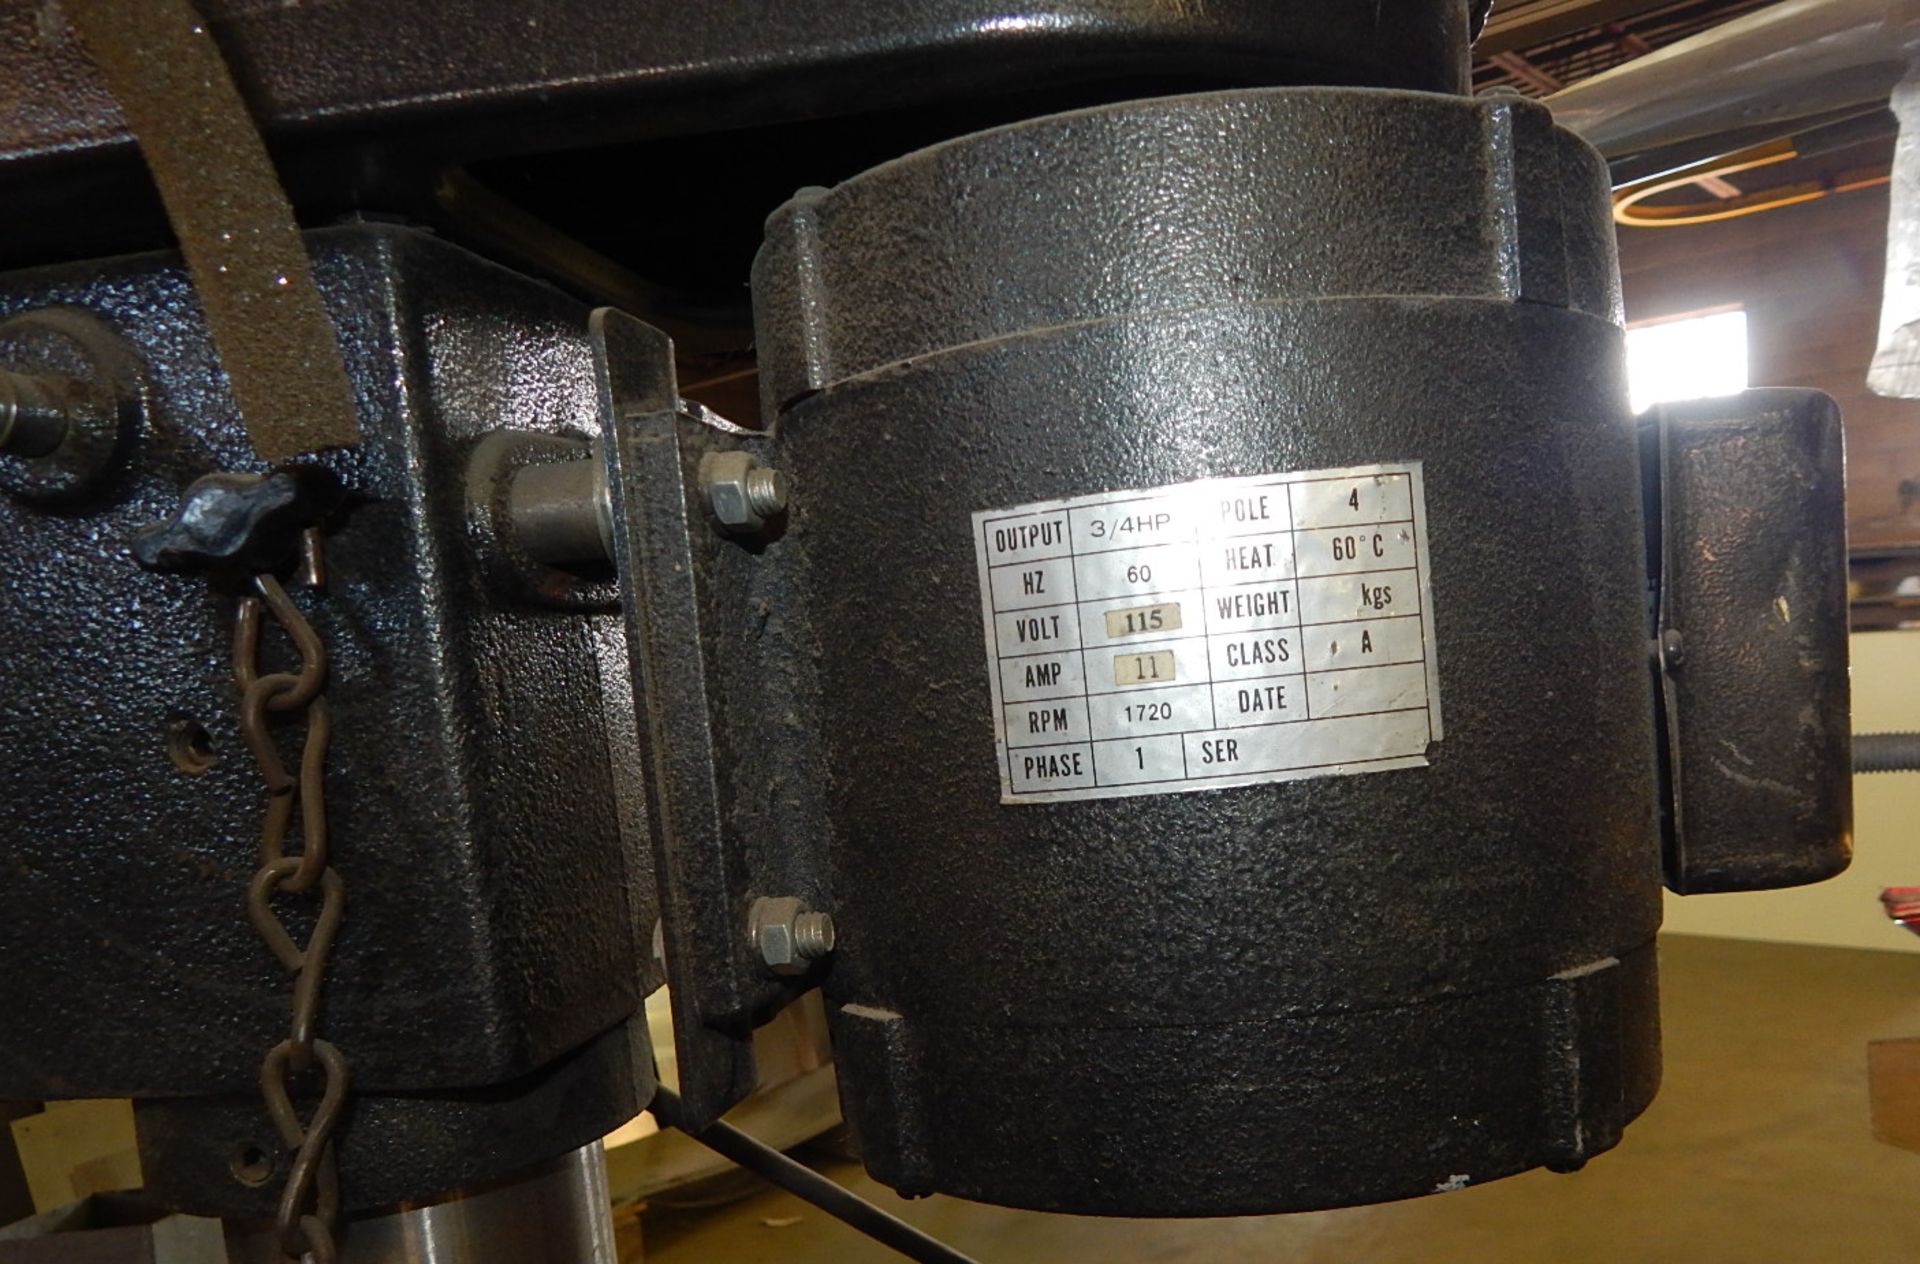 MFG UNKNOWN 16 SPEED DRILL PRESS S/N: 02987 - Image 3 of 4